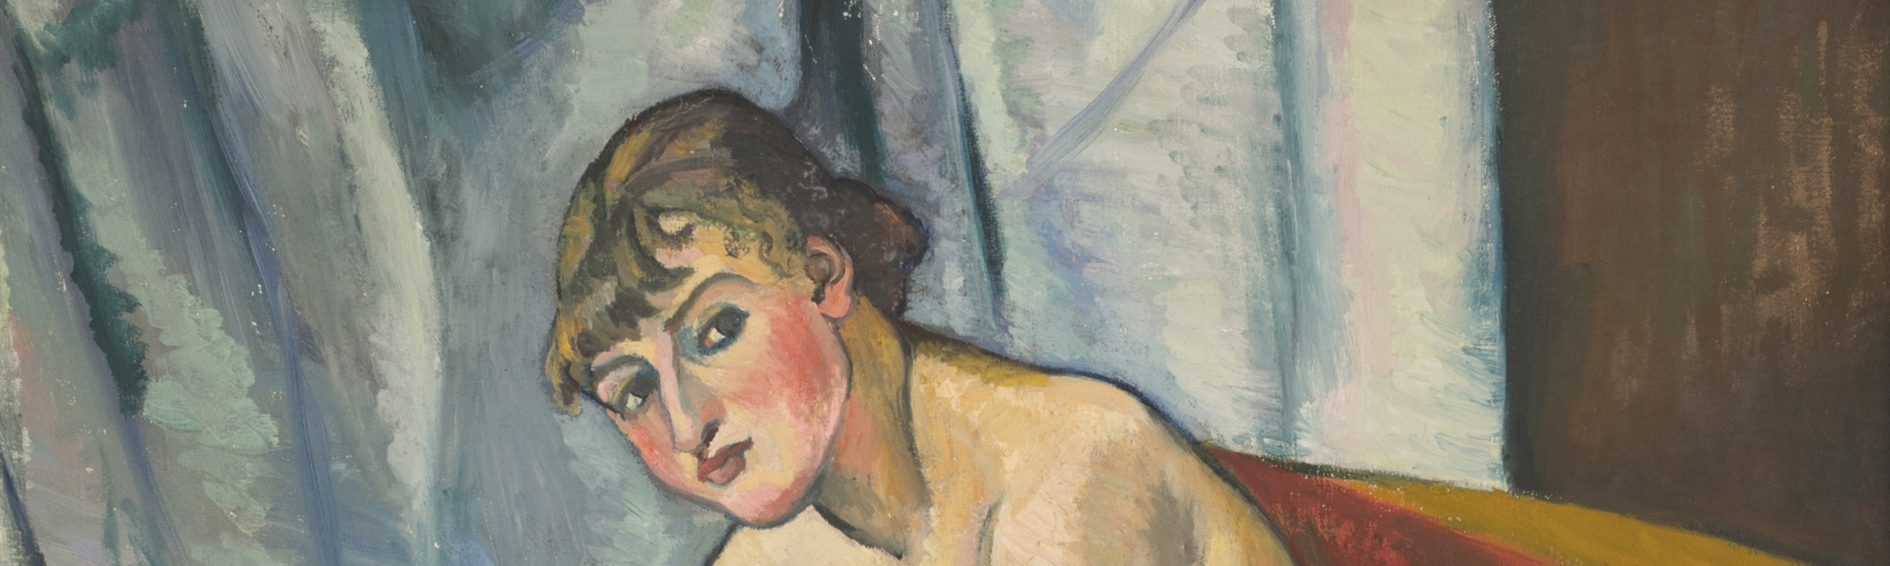 Nude Sitting on a Sofa (Nue assise sur un canapé), The Weisman & Michel Collection. Suzanne Valadon. SUZANNE VALADON – MODEL, MALER, REBEL. Ny Carlsberg Glyptotek